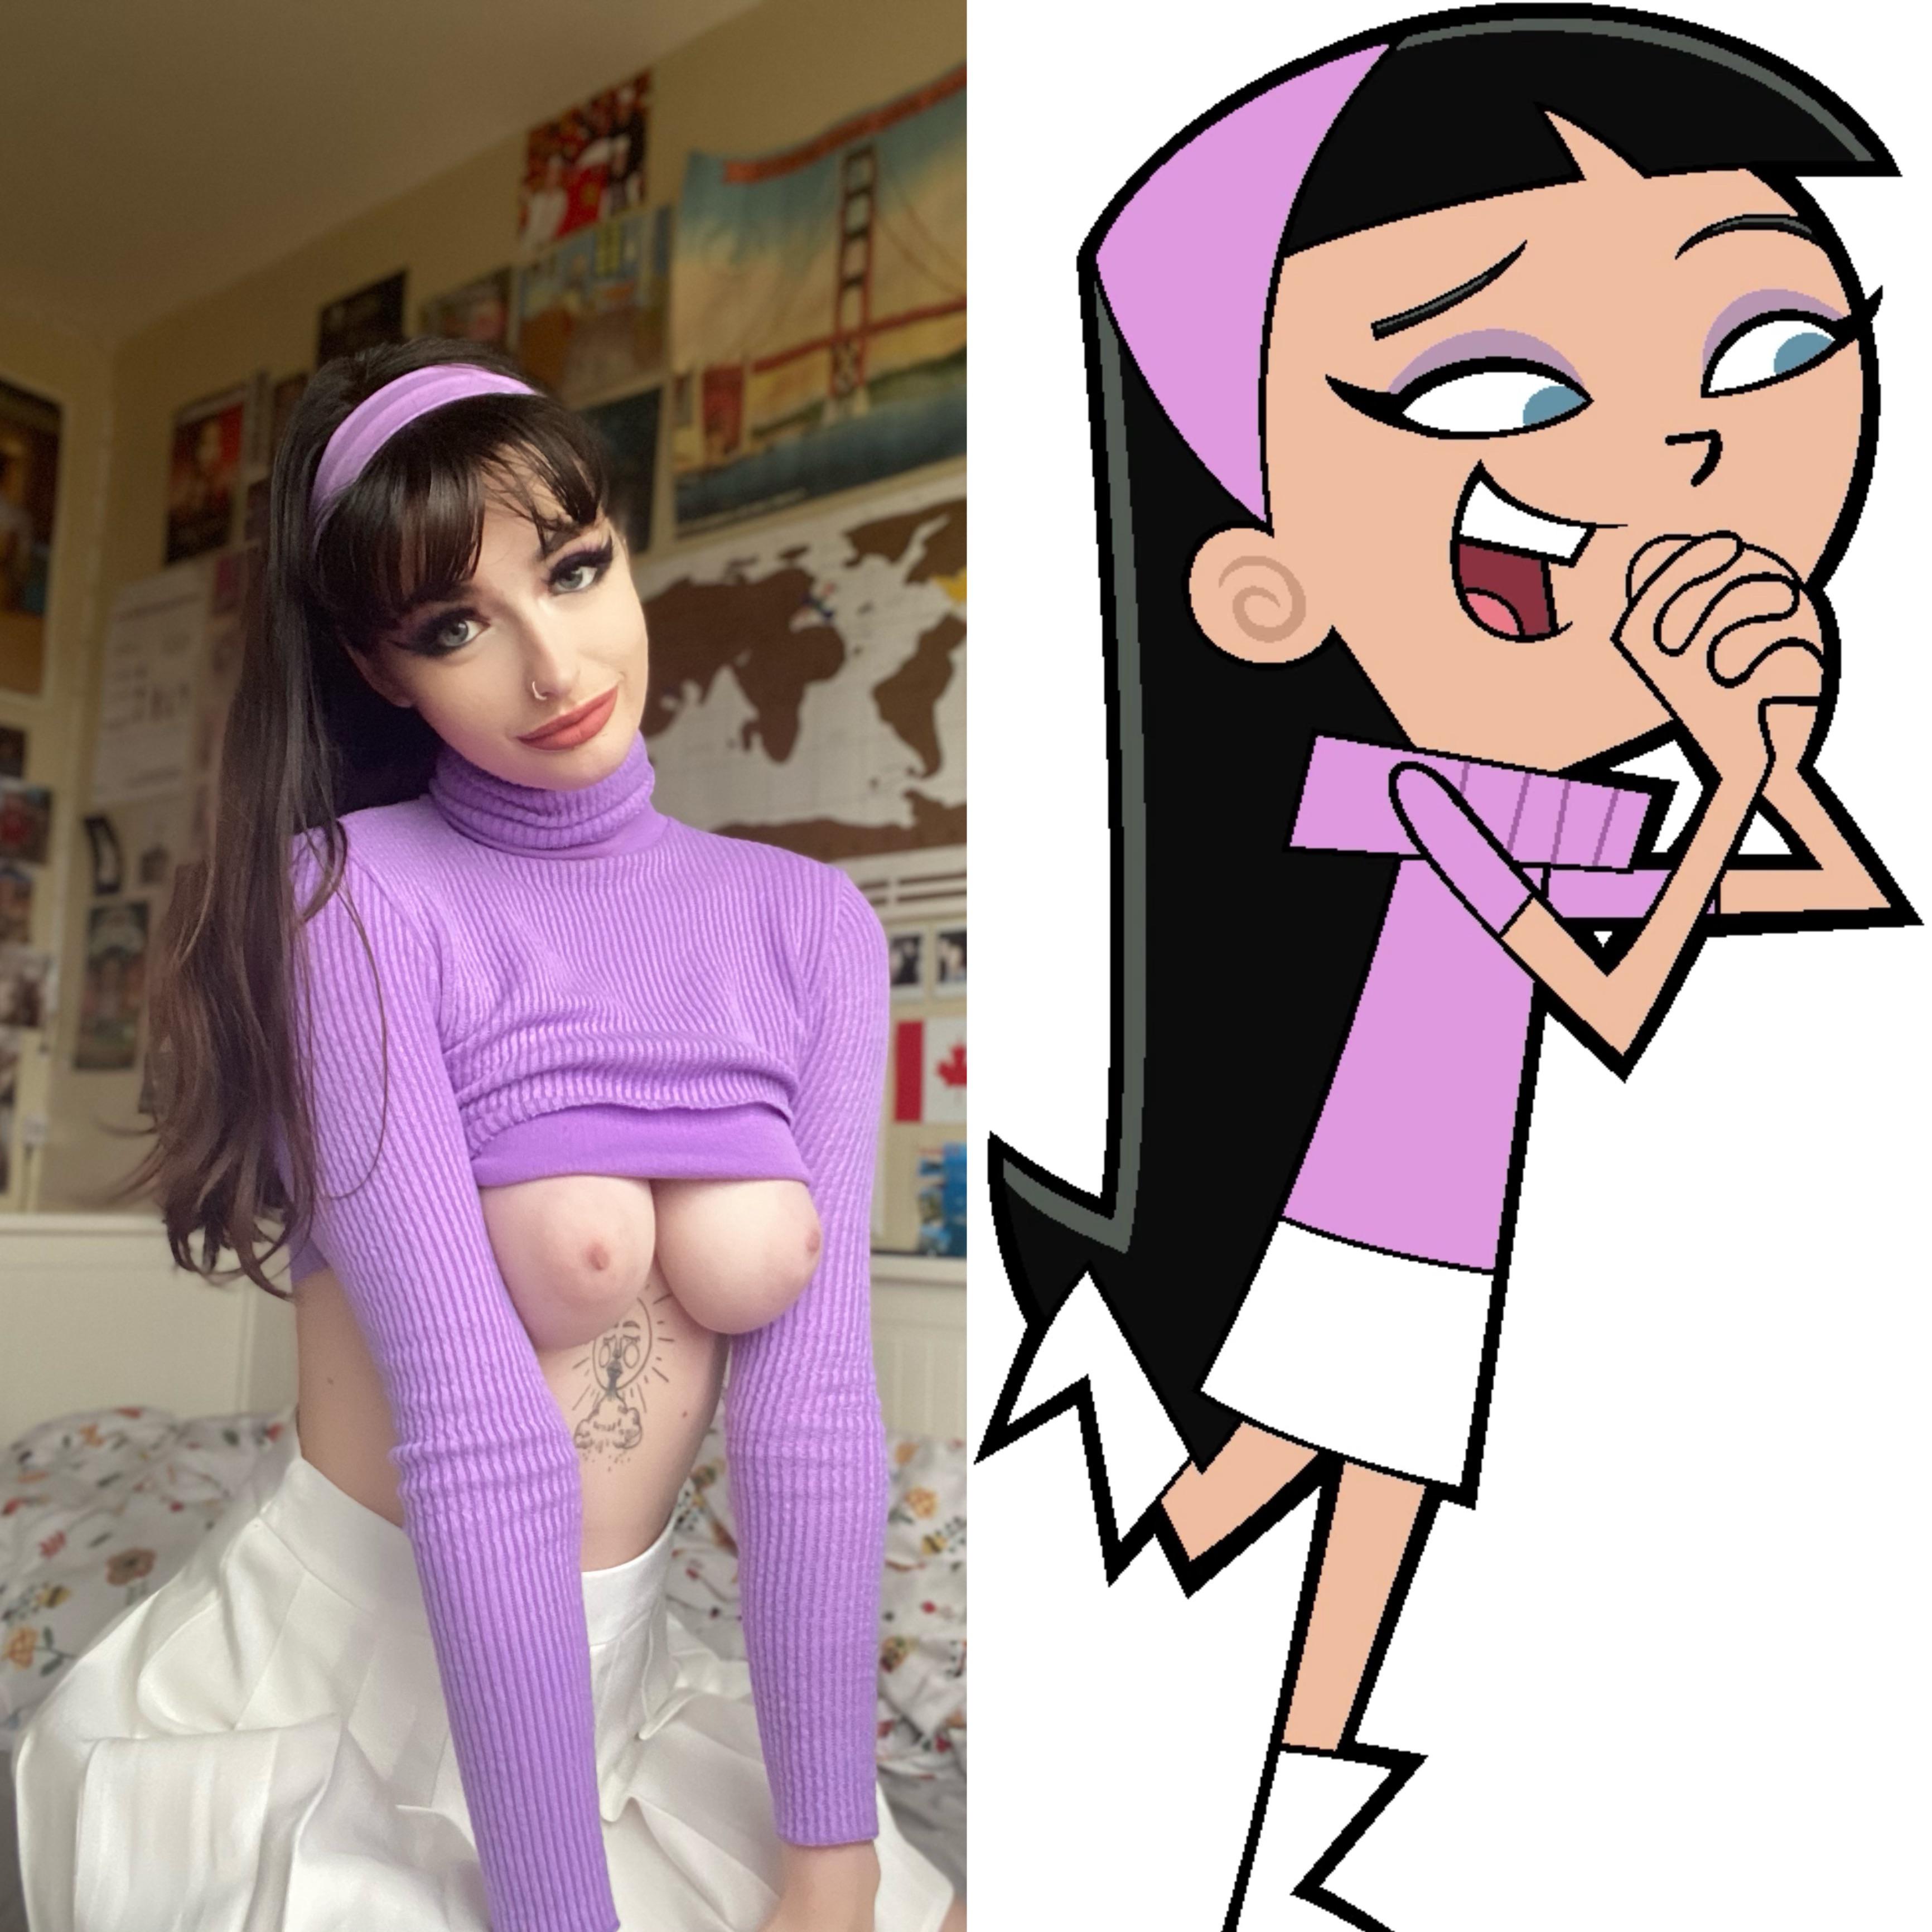 Fairly Oddparents Porn Tootie Herd Rock - Slutty Trixie Tang from Fairly Odd Parents by u/claudianimhrucu